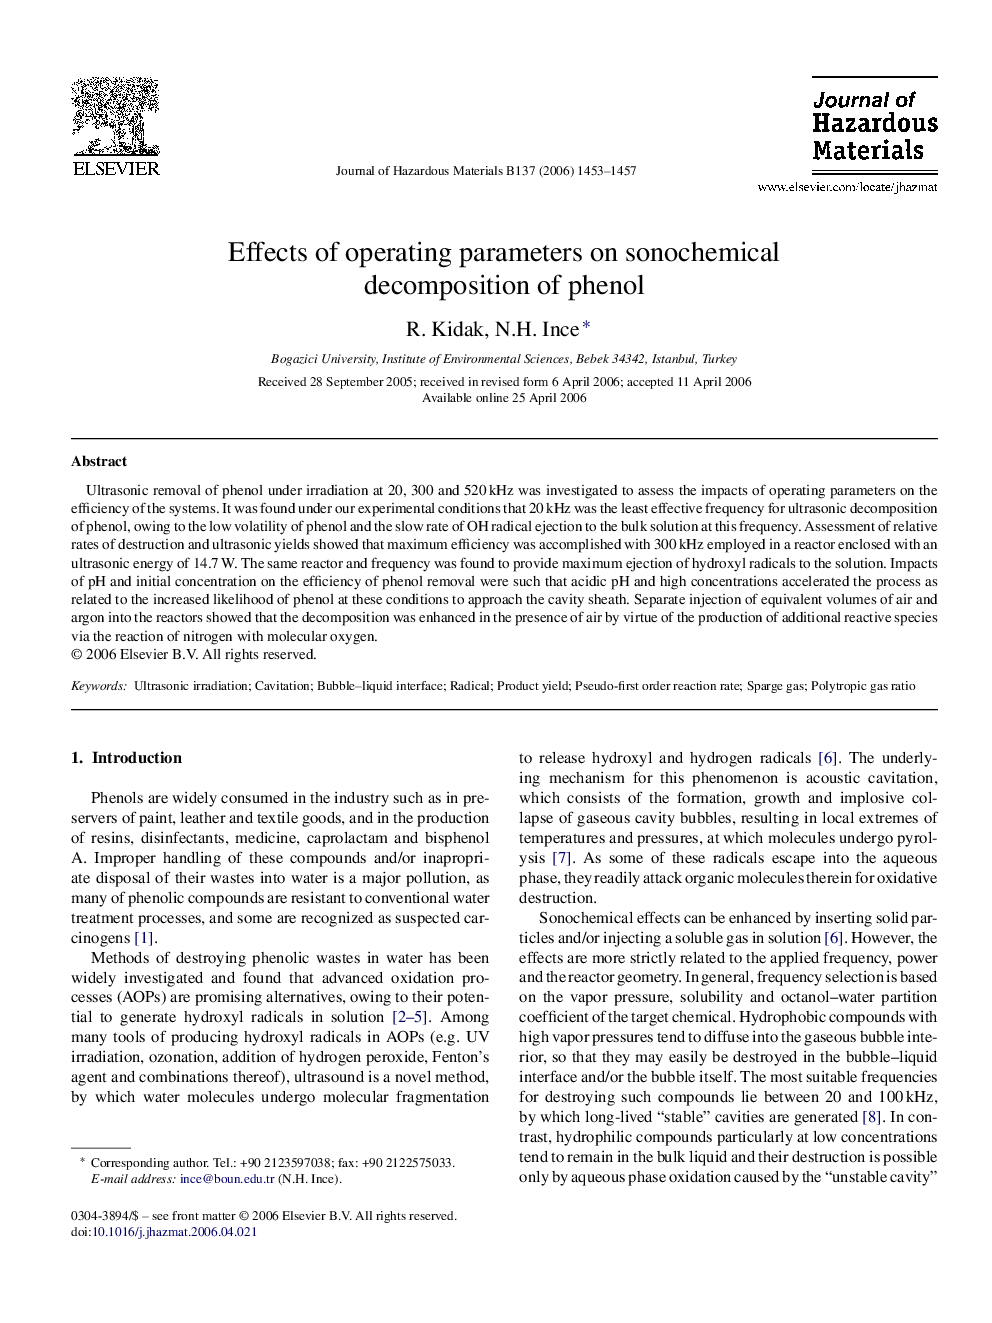 Effects of operating parameters on sonochemical decomposition of phenol